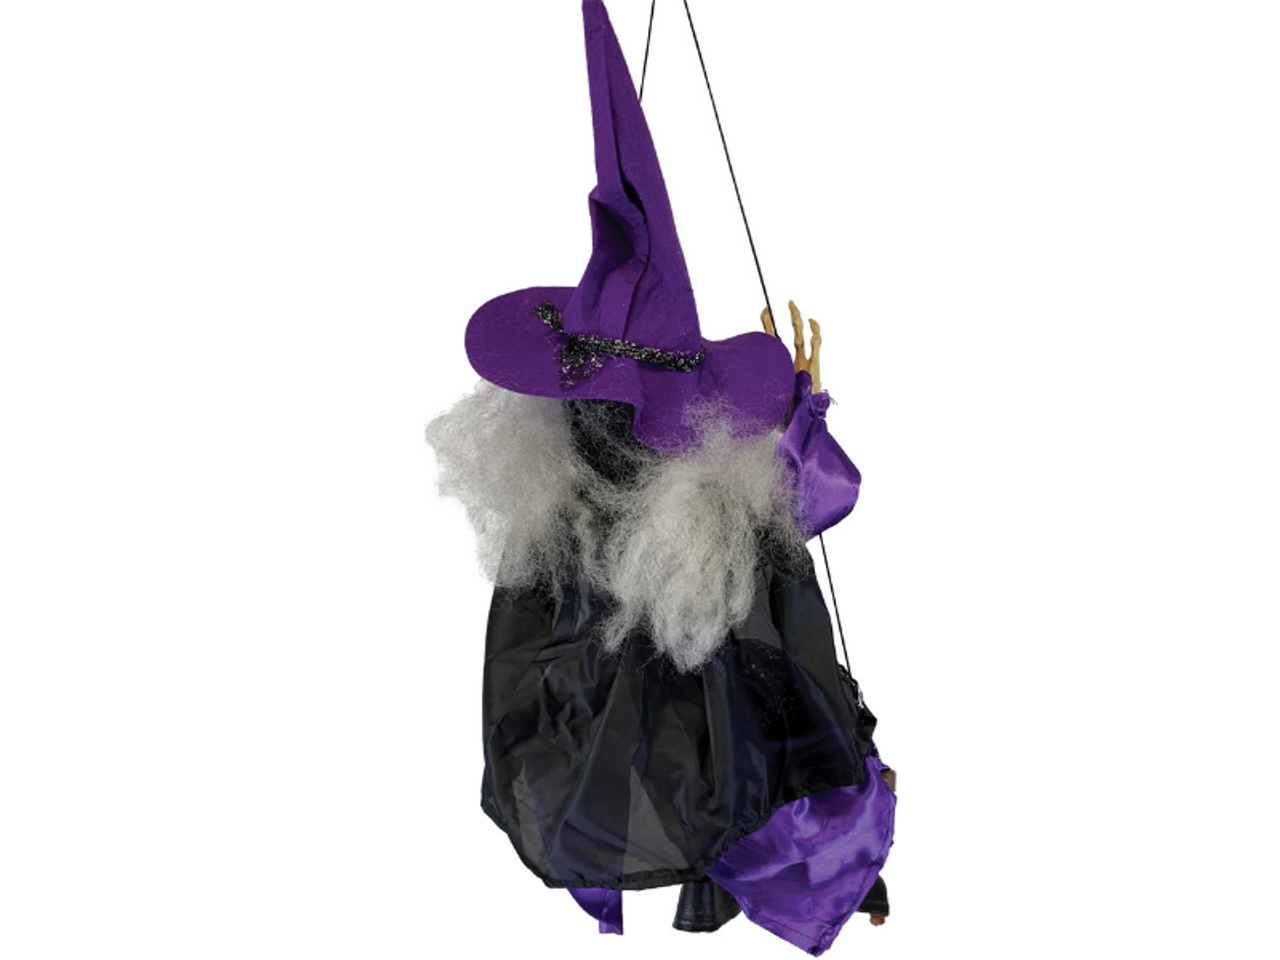 39-Inch Kicking Witch On Swing

Add some giggles to your next haunted scene with our fun Kicking Witch on a Swing!

Her Eyes Light Up when she speaks, and her Legs kick periodically. She has little black witch boots, a deep purple Satiny Dress with a silver glitter overlay and silver braid trim. She has a little Black Cape with matching silver braid that ties at the neck. Fluffy greyish-white hair covers her shoulders, and she has a black witch hat with more glitter on the hat band. She hangs by a black satiny cord that extends from the swing seat to her hands and creates the hanging loop.  

Requires 3 AA Batteries not included. 

Features

Funny Hanging Witch Kicks her Legs
Eyes Light Up Red and She Speaks while Kicking
Colorful Purple Dress with Silver Glitter and Trims
 